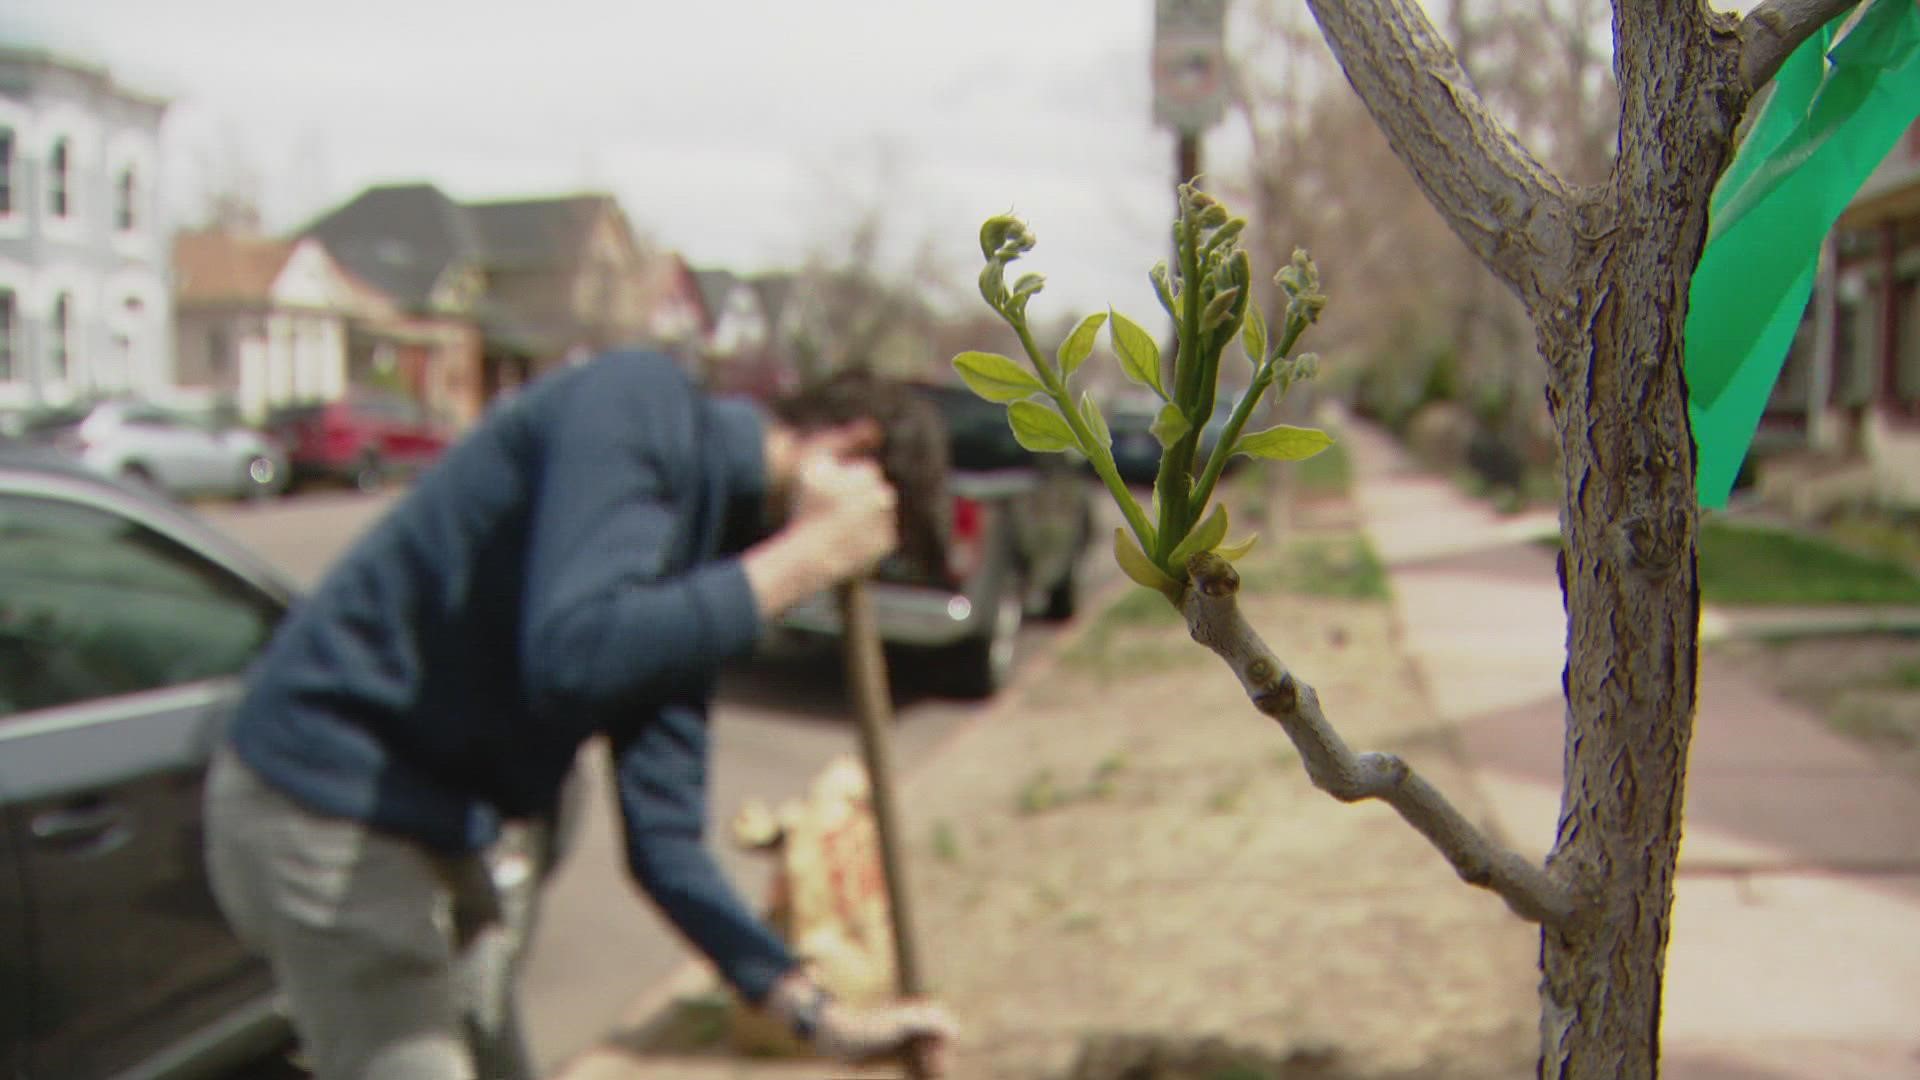 On Saturday, 50 trees were planted in Curtis Park and Five Points.